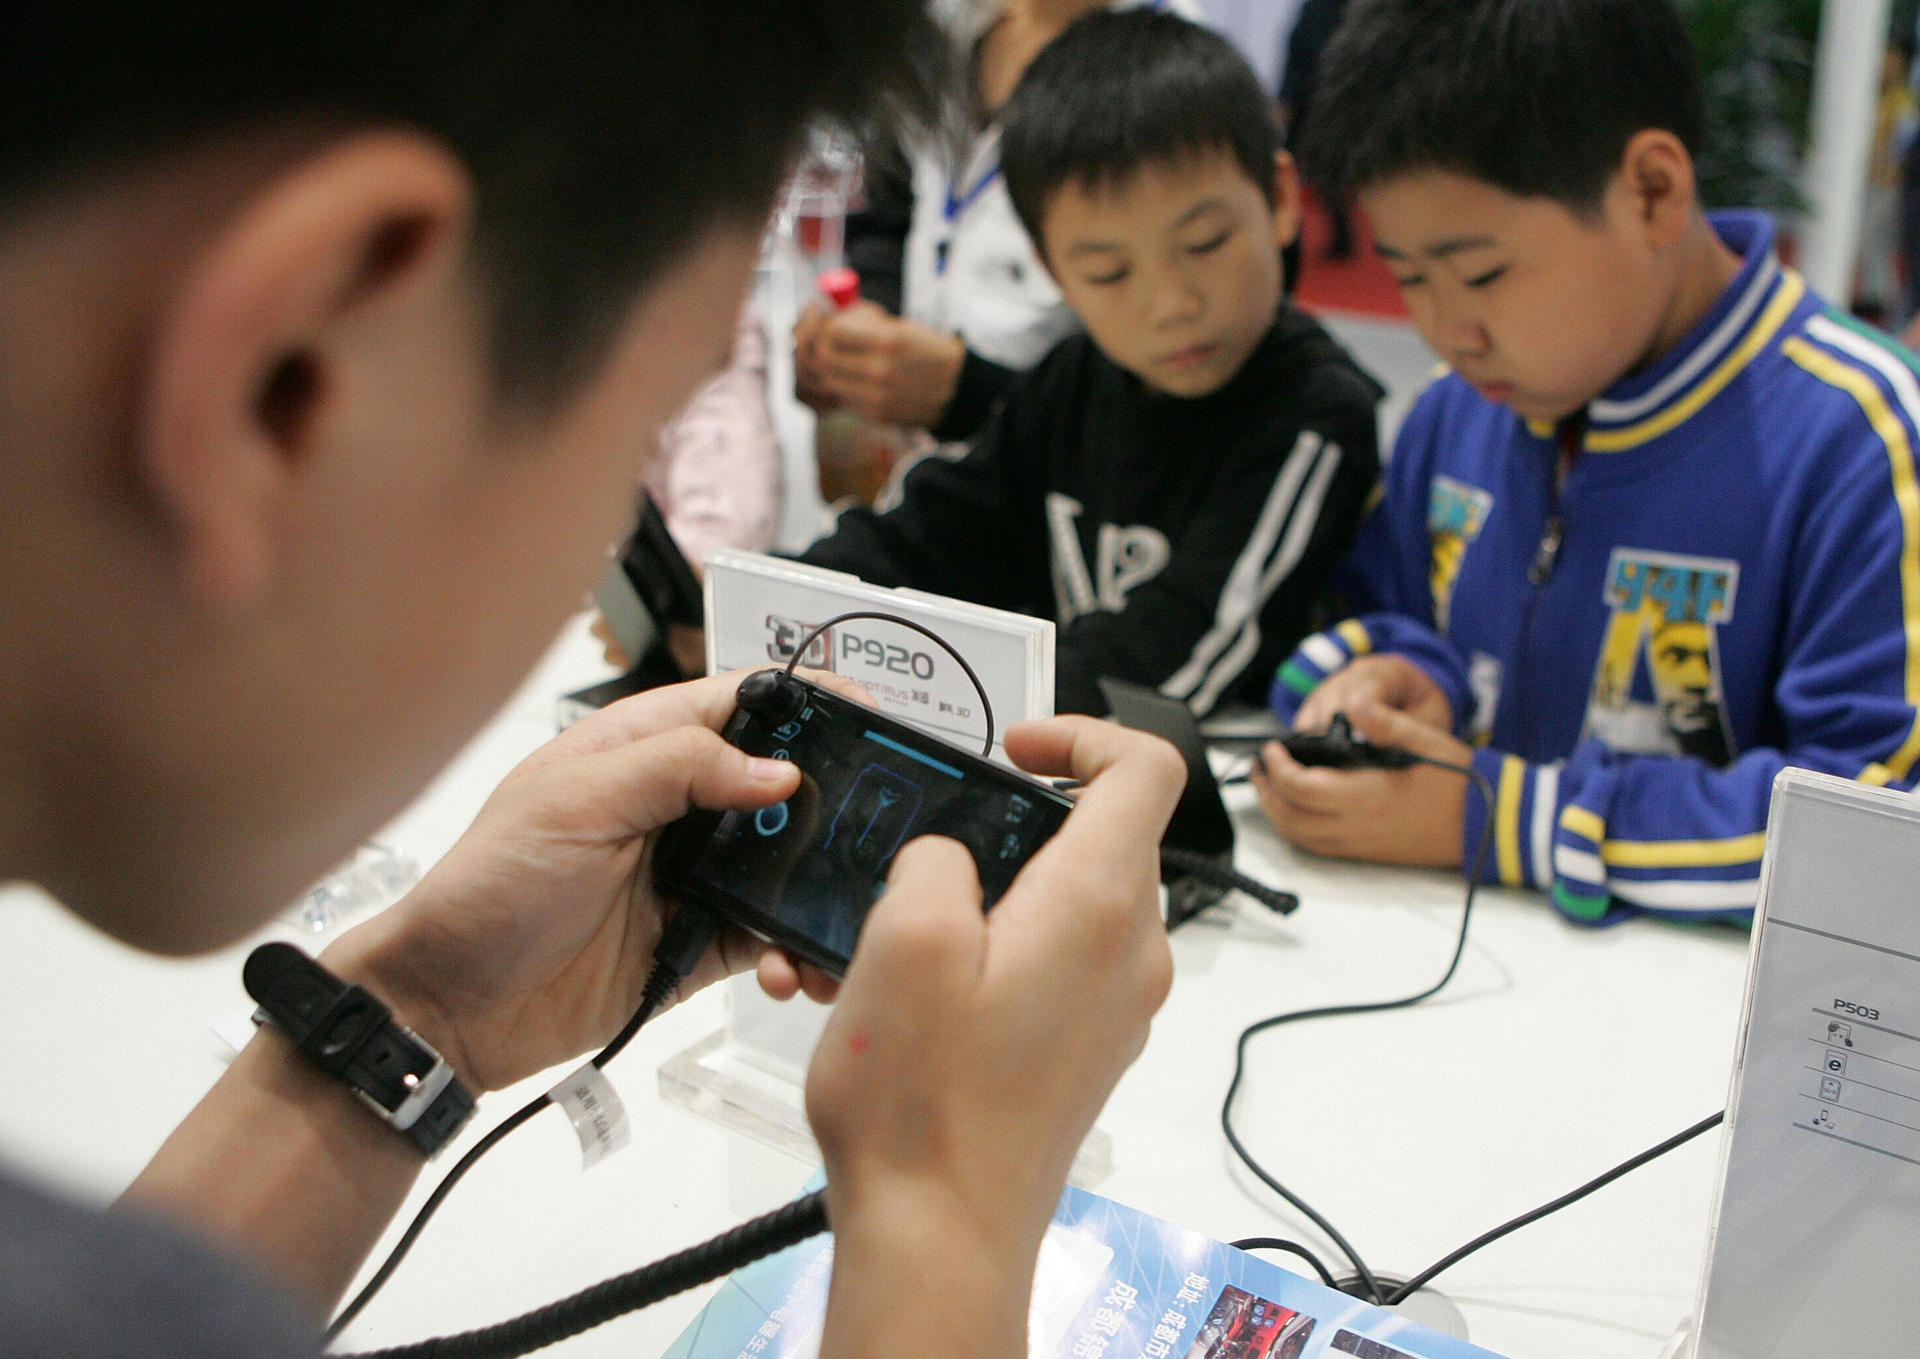 The number of users of mobile games on the mainland increased 15 per cent to 358 million in 2014, says the government. Photo: Imaginechina